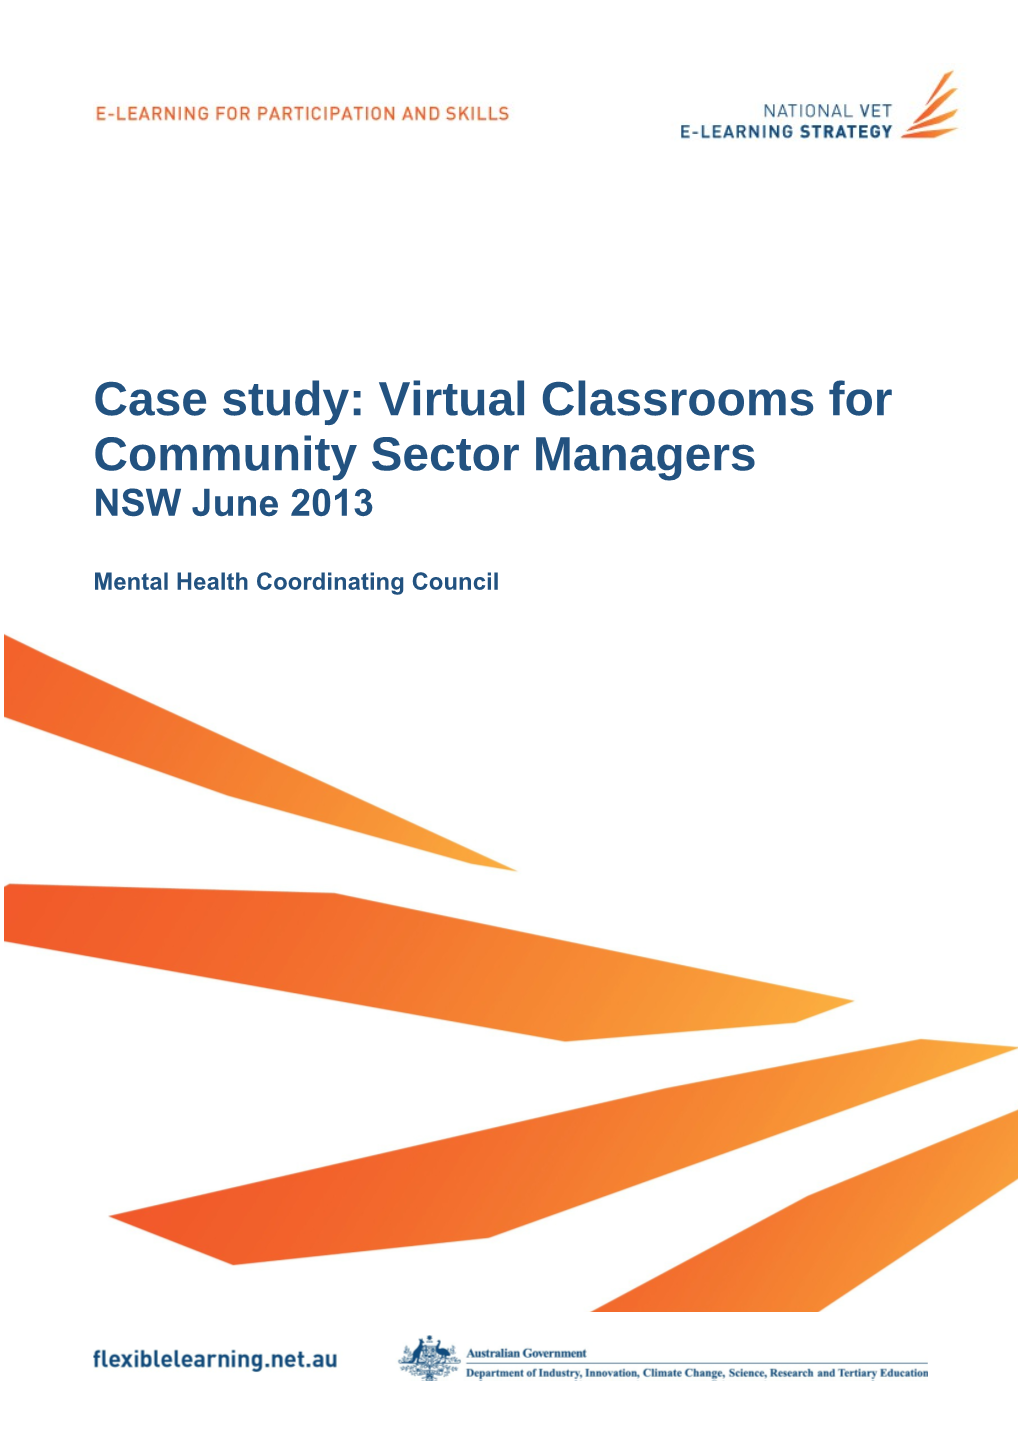 Virtual Classrooms for Community Sector Managers